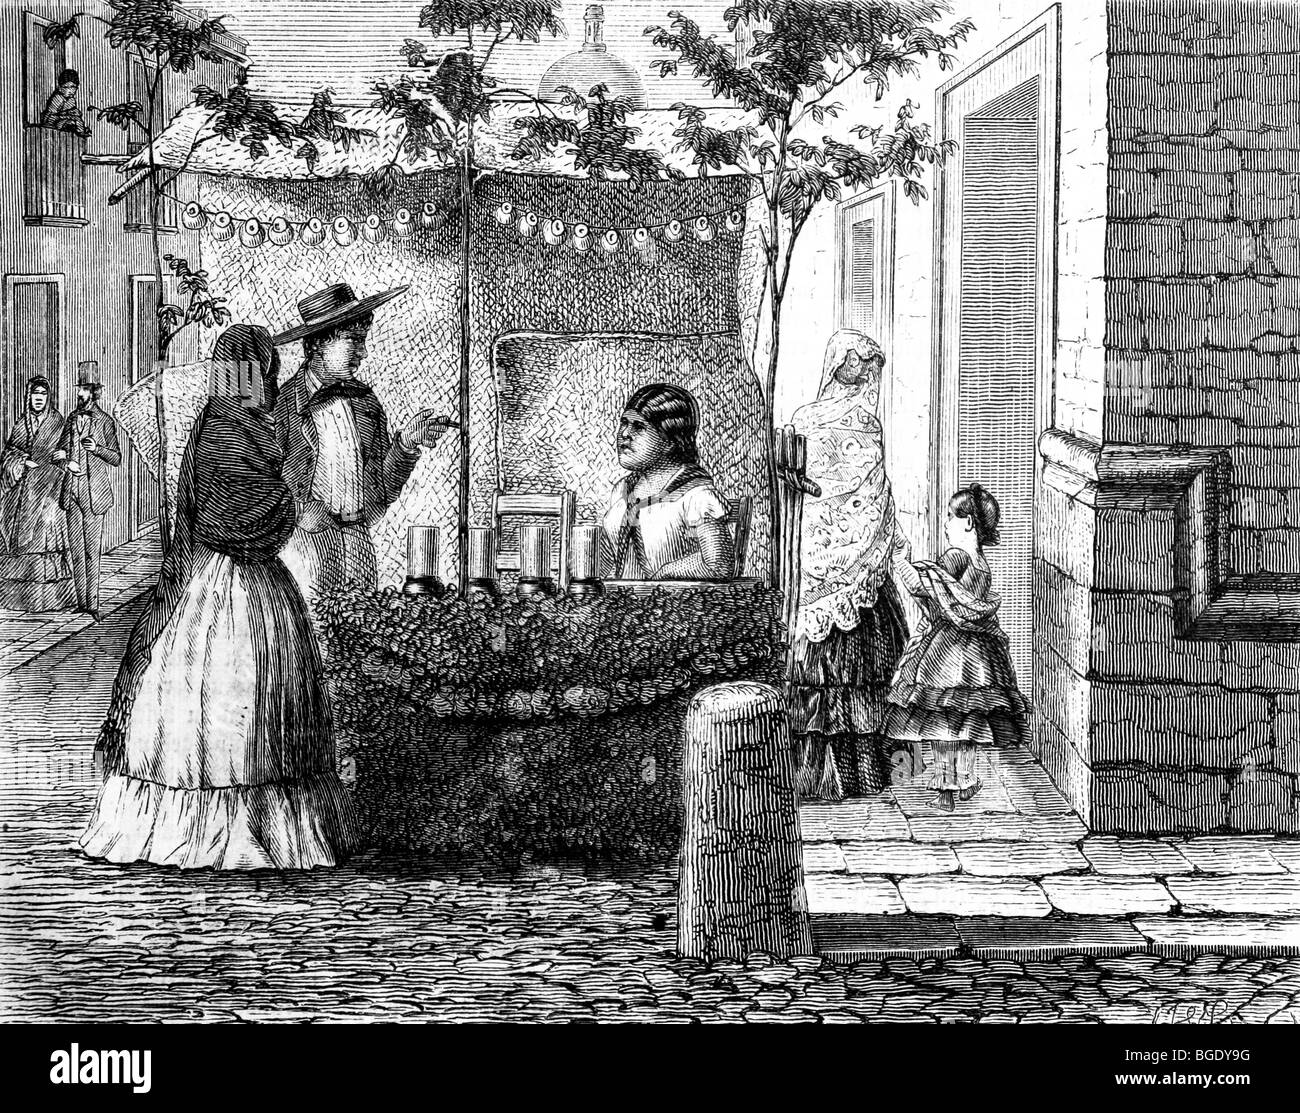 Lithography illustration. Old image of Mexico by Hegi Stock Photo